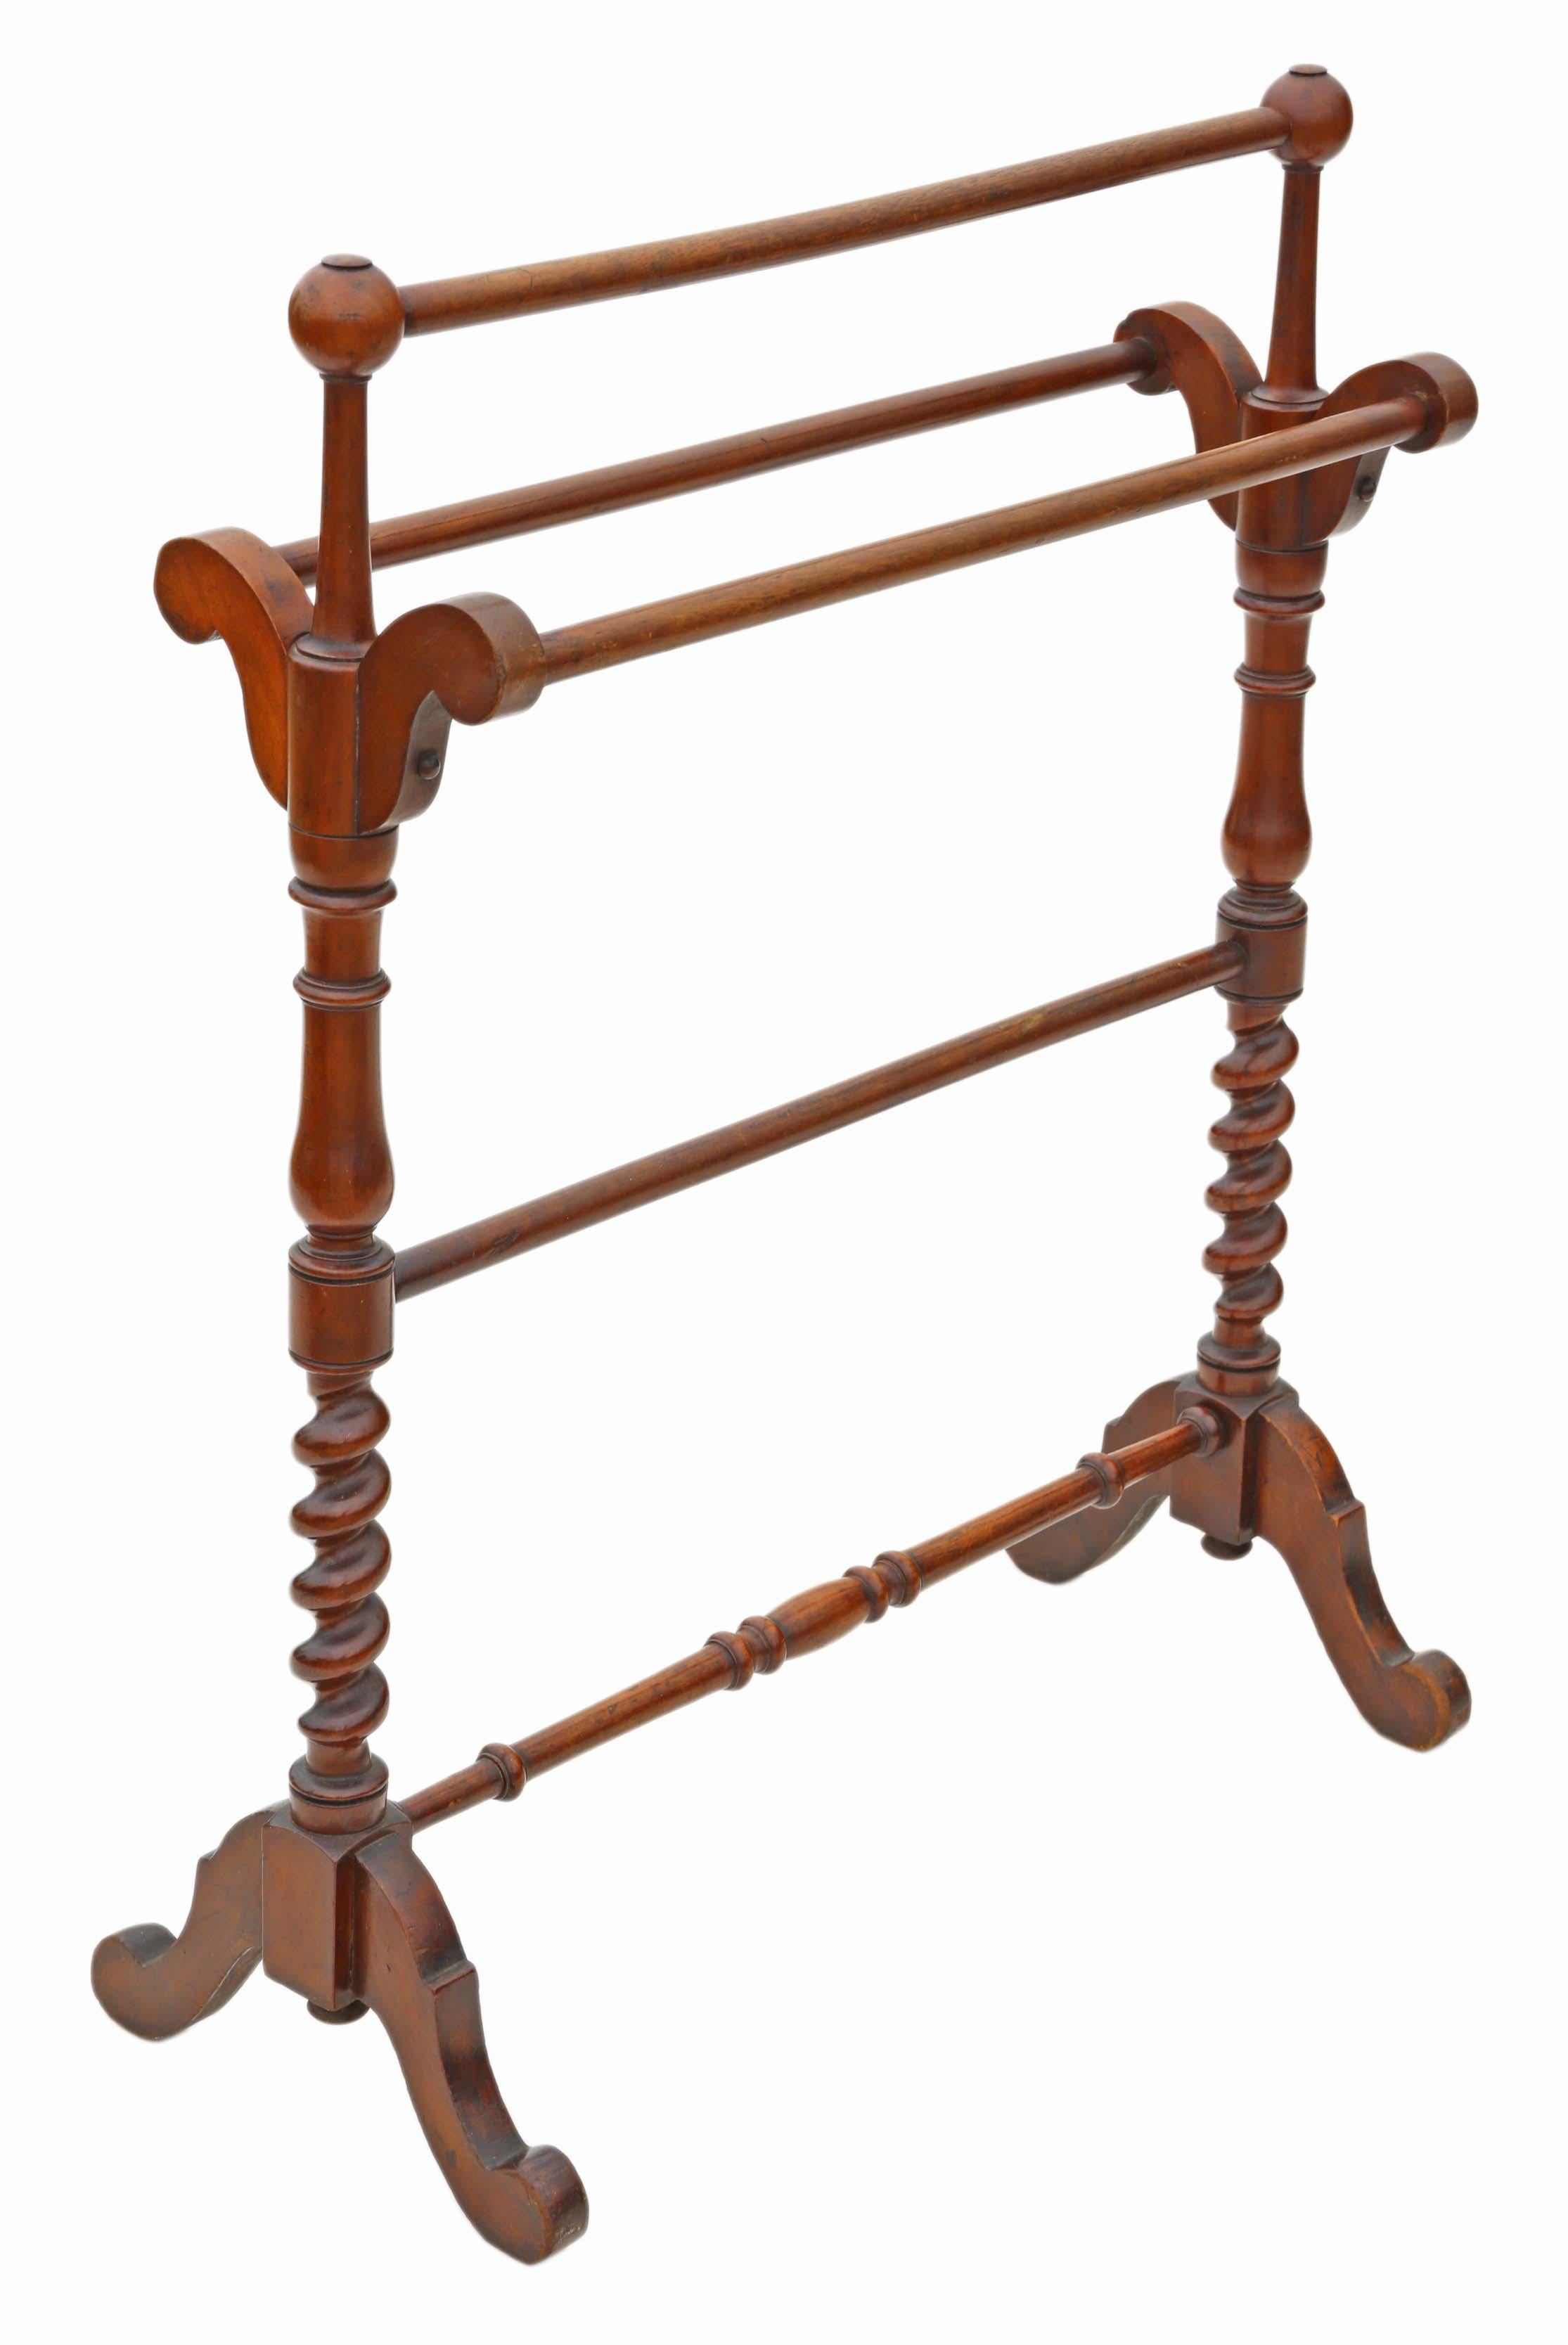 Antique quality Victorian circa 1880 mahogany towel rail stand.
This item is solid and strong, with no loose joints.
No woodworm.
Would look amazing in the right location!
Overall maximum dimensions:
71cm W x 33cm D x 89cm H.
In very good